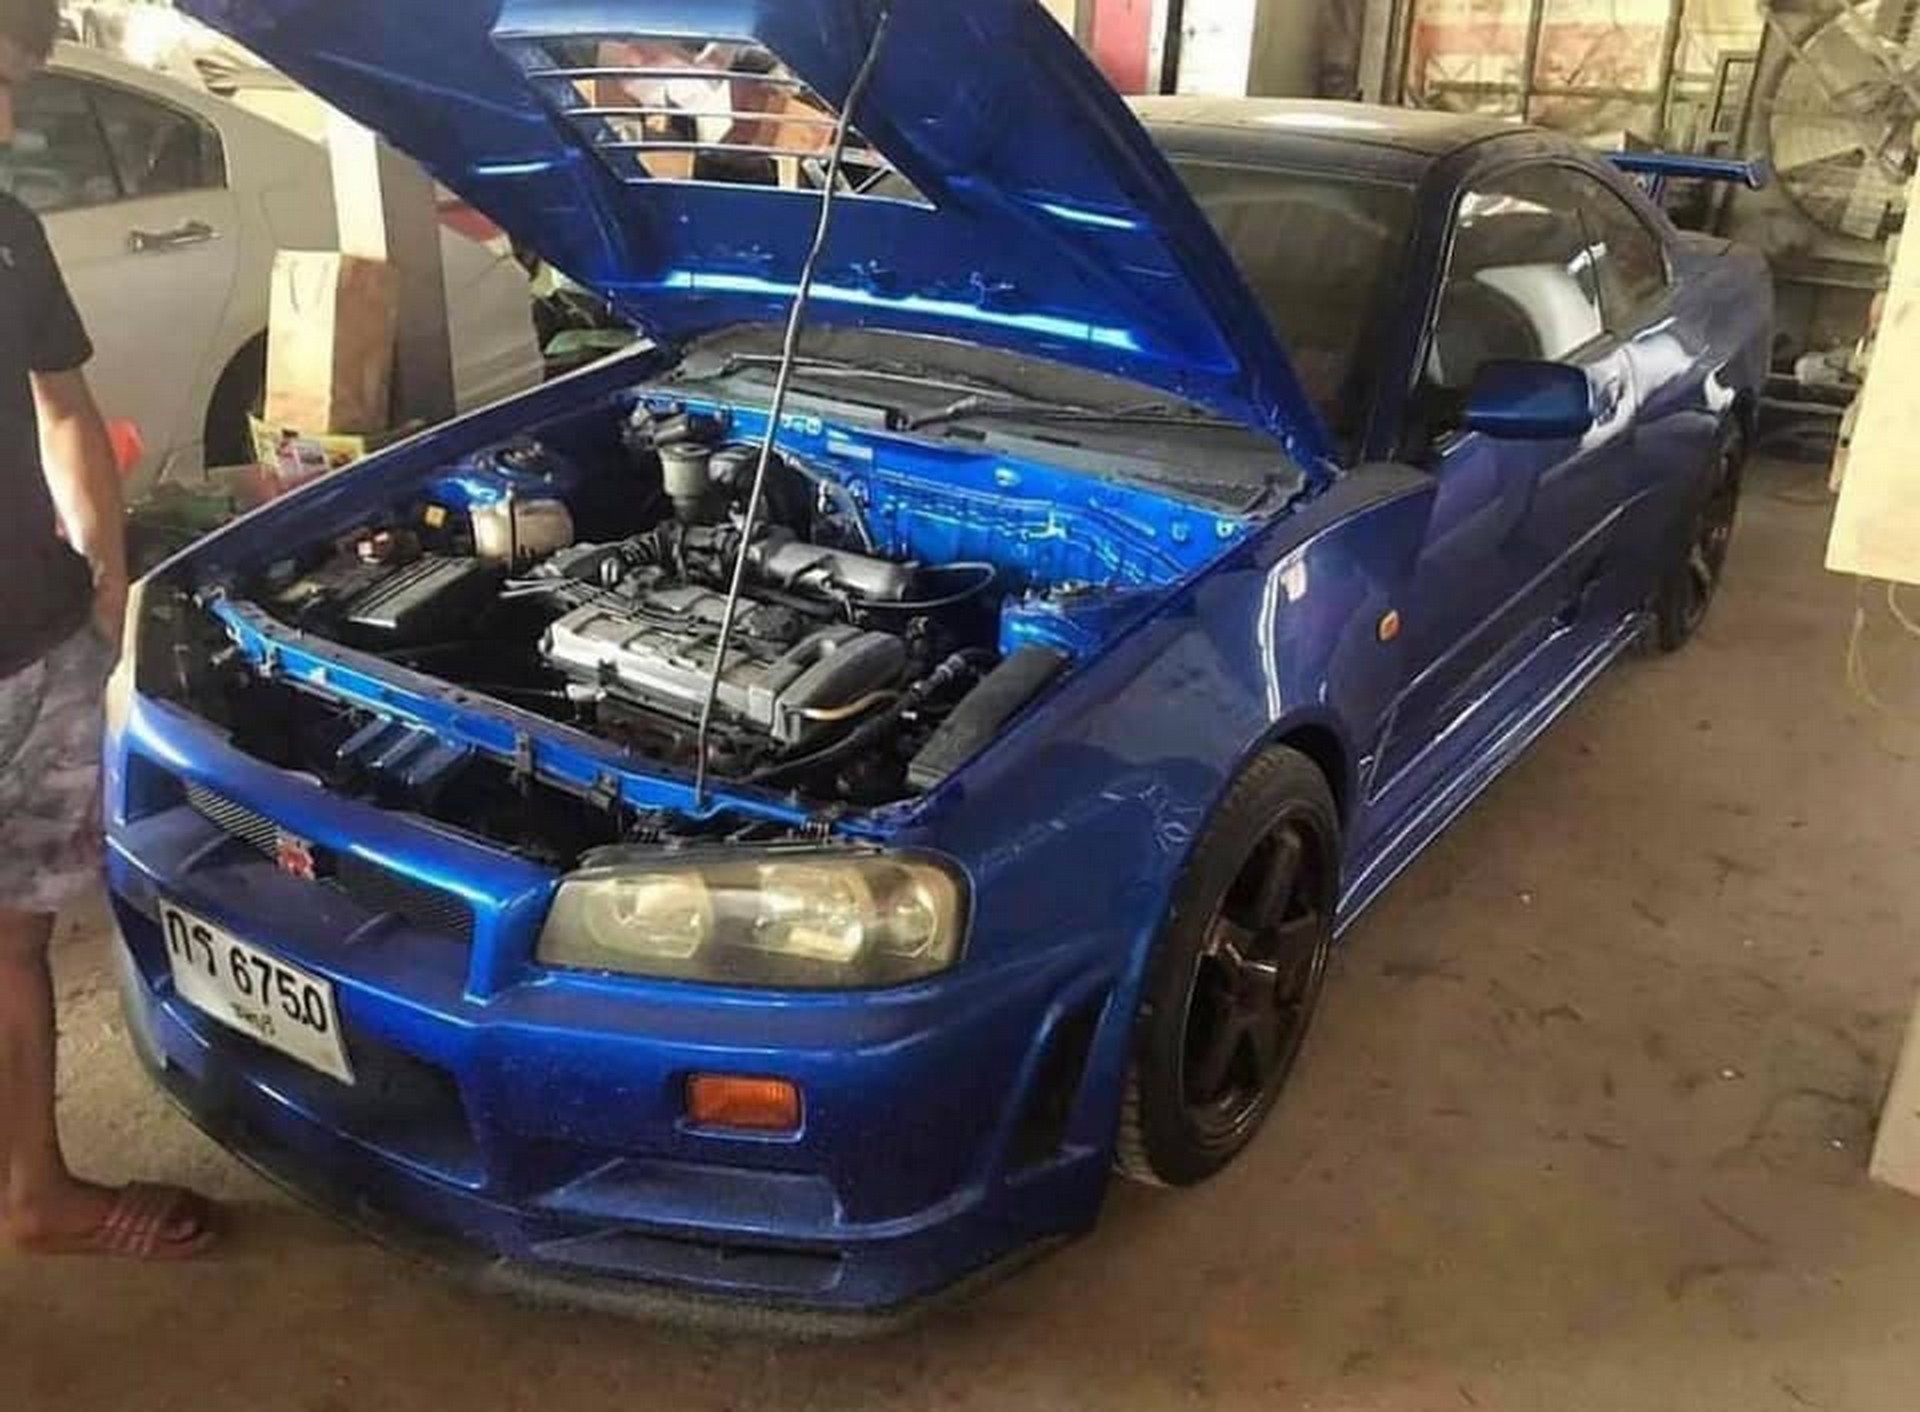 Nissan Skyline GT-R R34: The True Cost Of Ownership